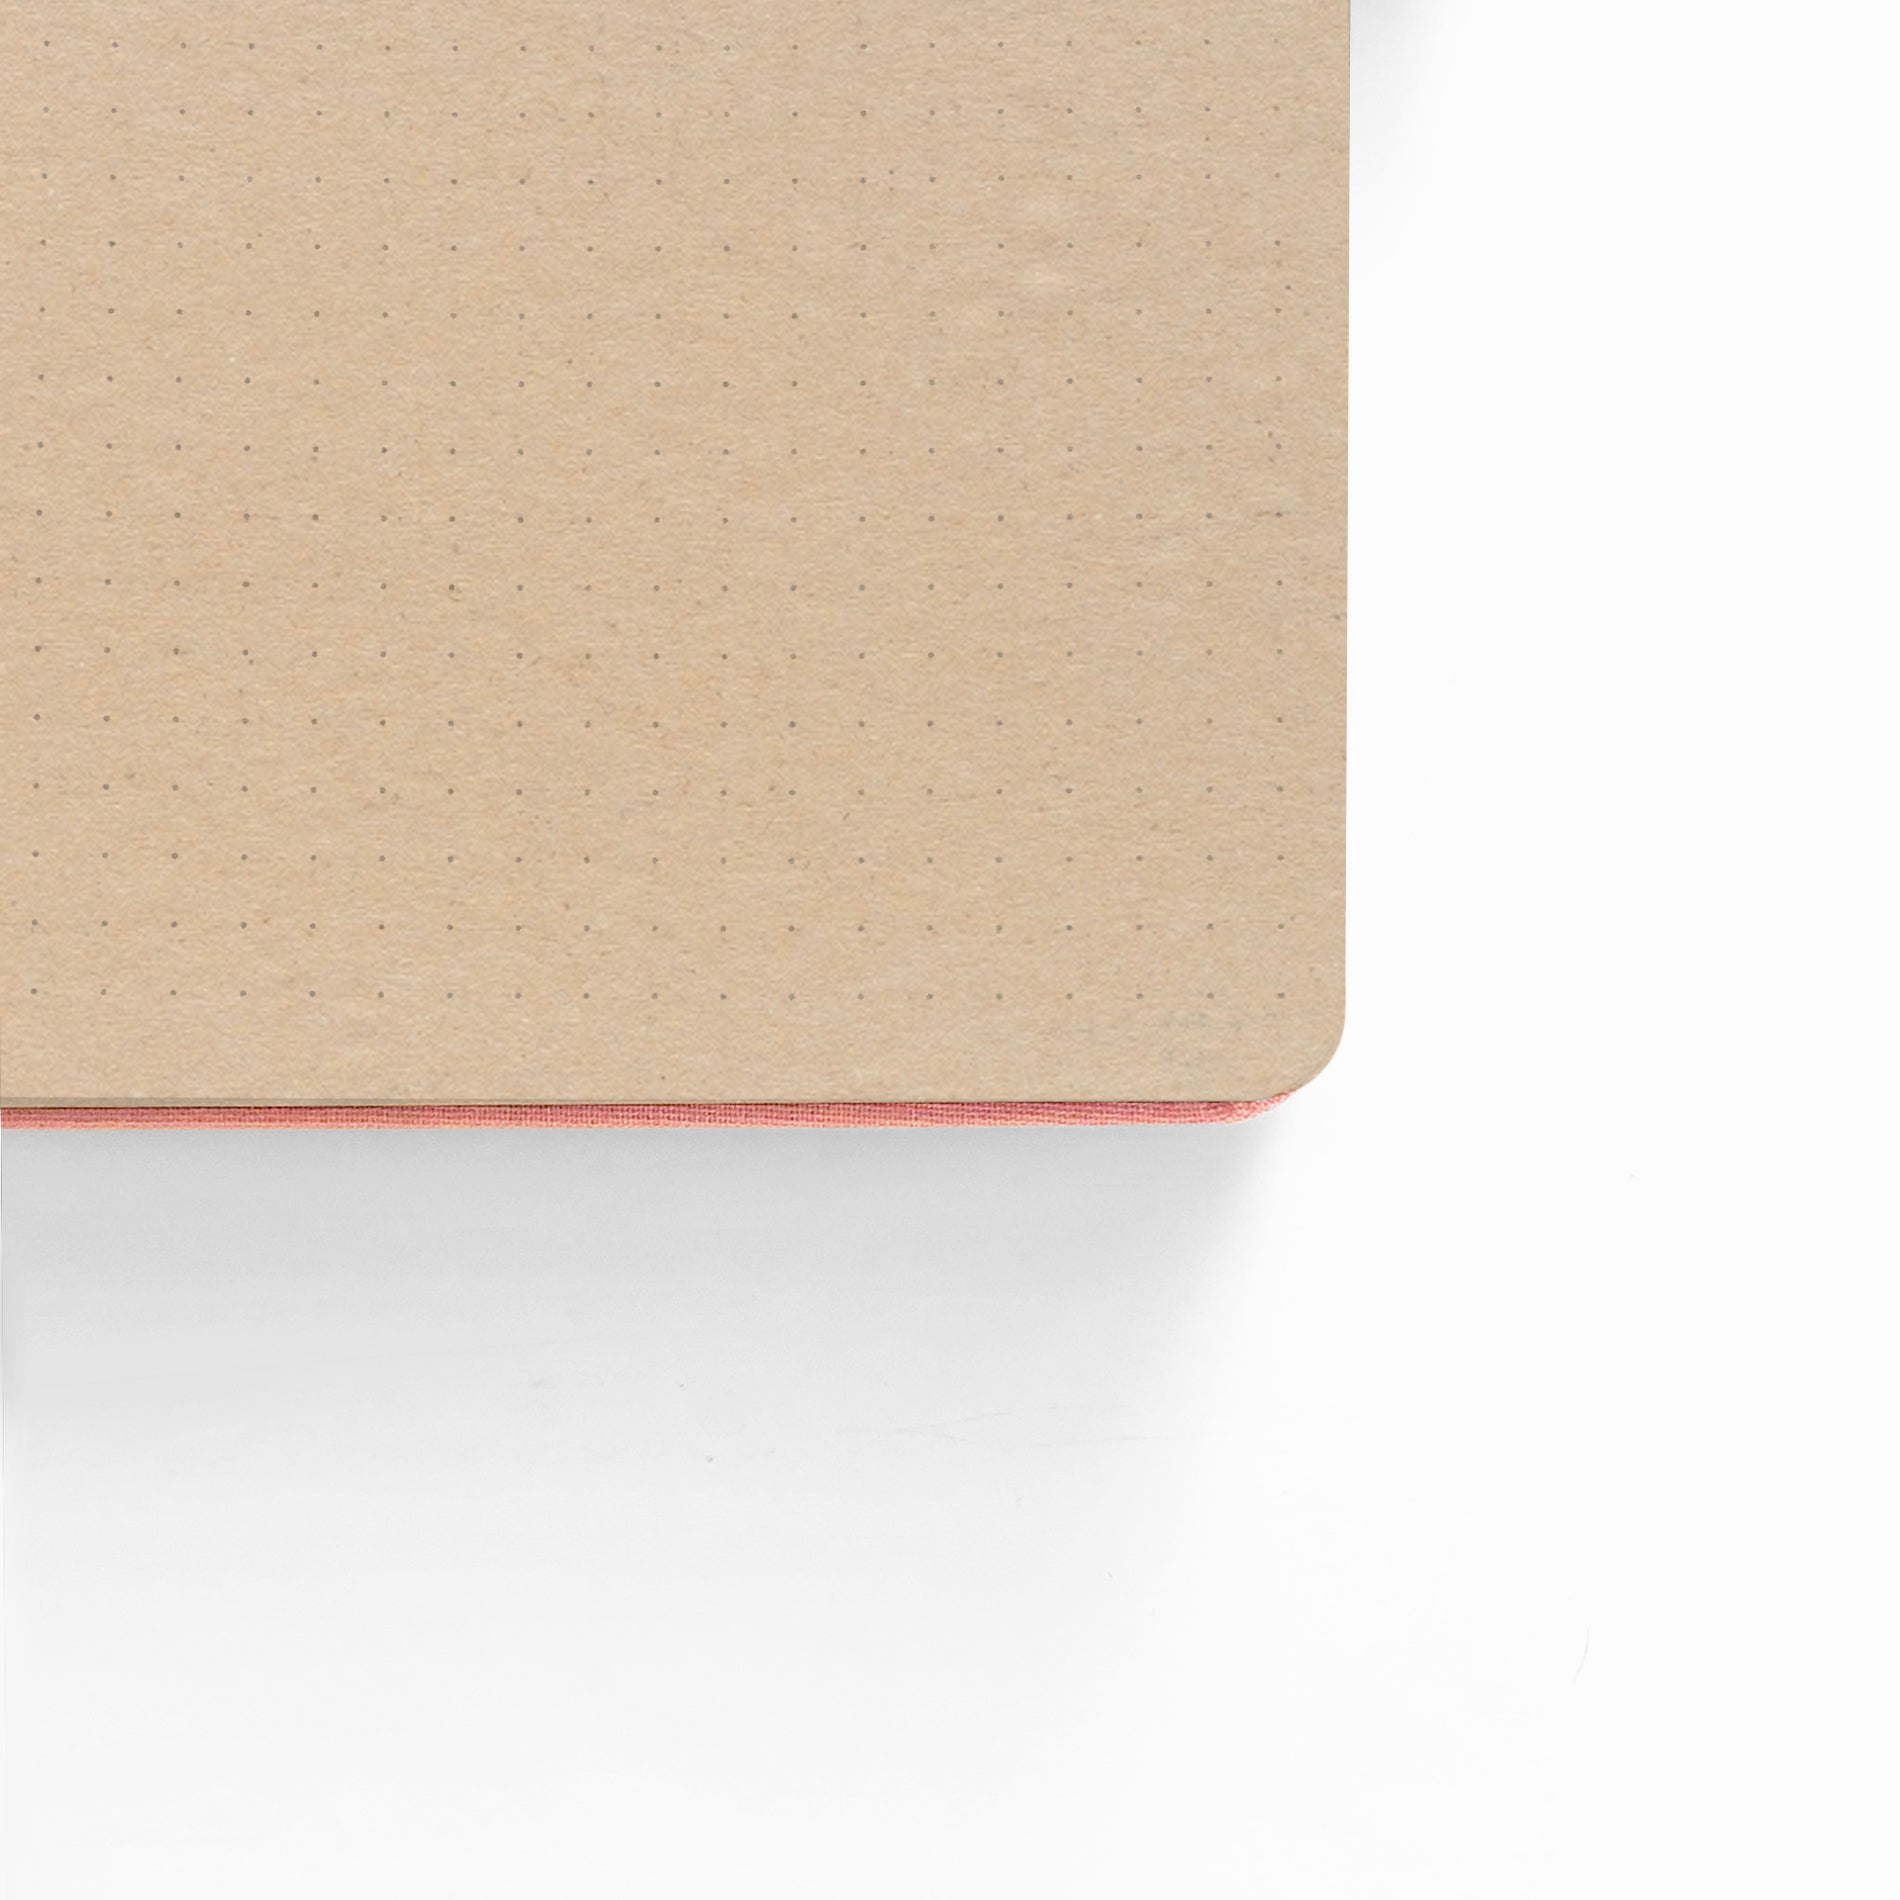 Pocket Size Dot Grid Notebook: Light Blue with Kraft Pages - September 2021 Sub Box - Archer and Olive